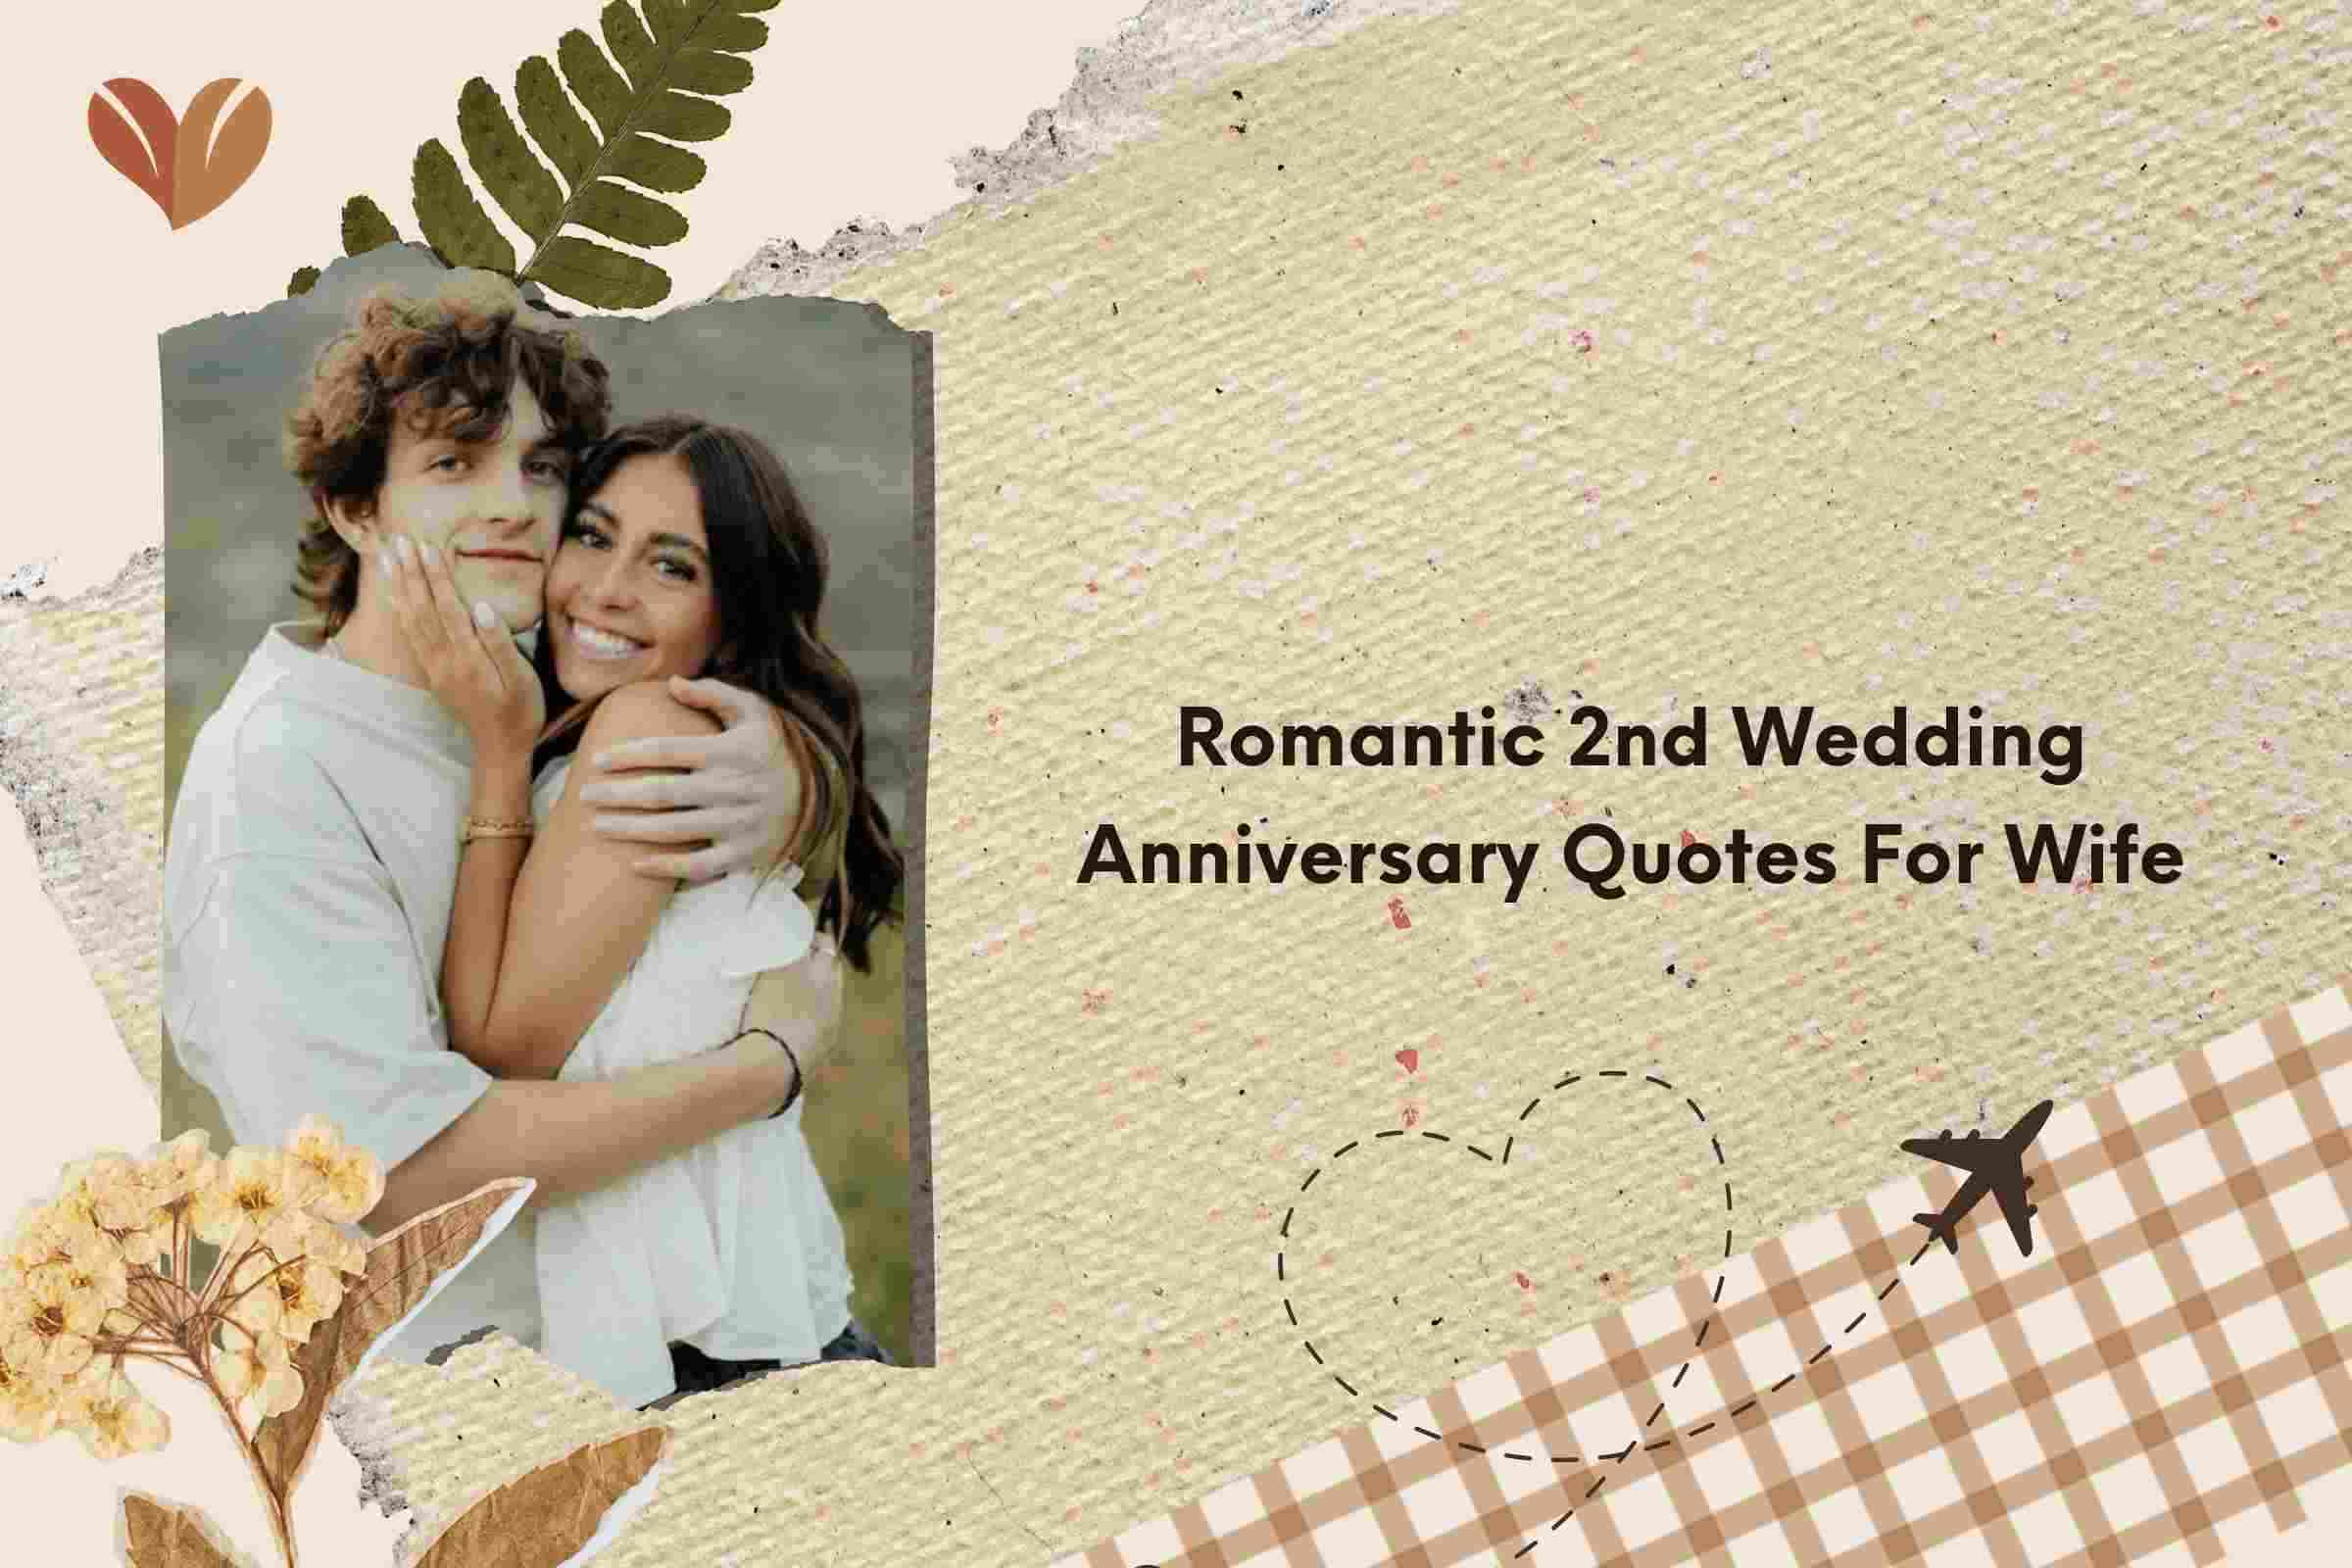 Romantic 2nd Wedding Anniversary Quotes For Wife